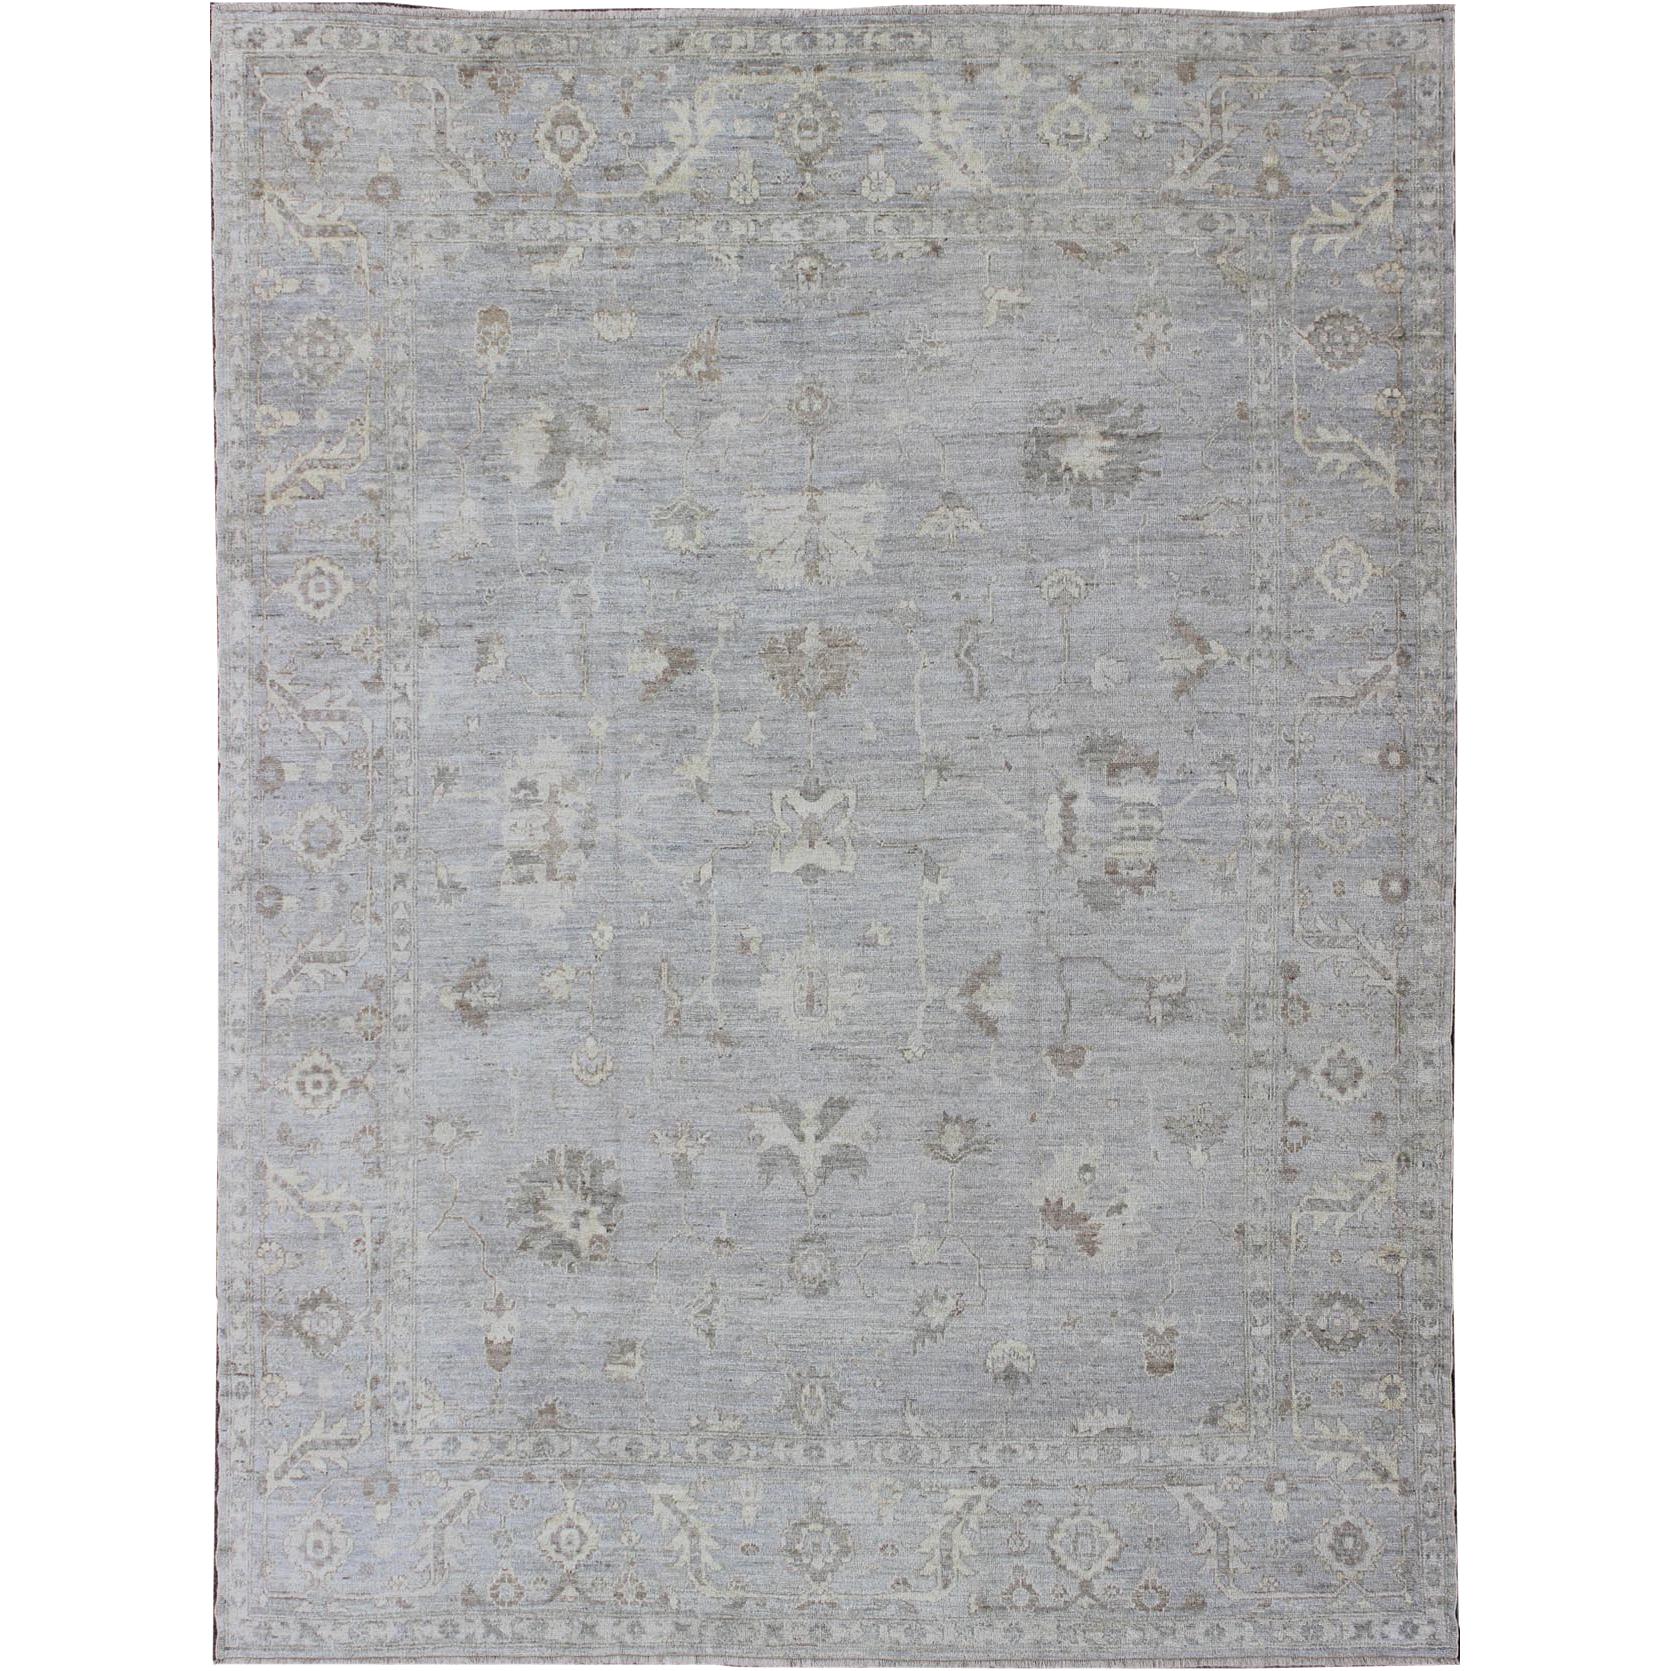 Modern Turkish Oushak Rug with Floral Motifs in Gray, Taupe and Lavender